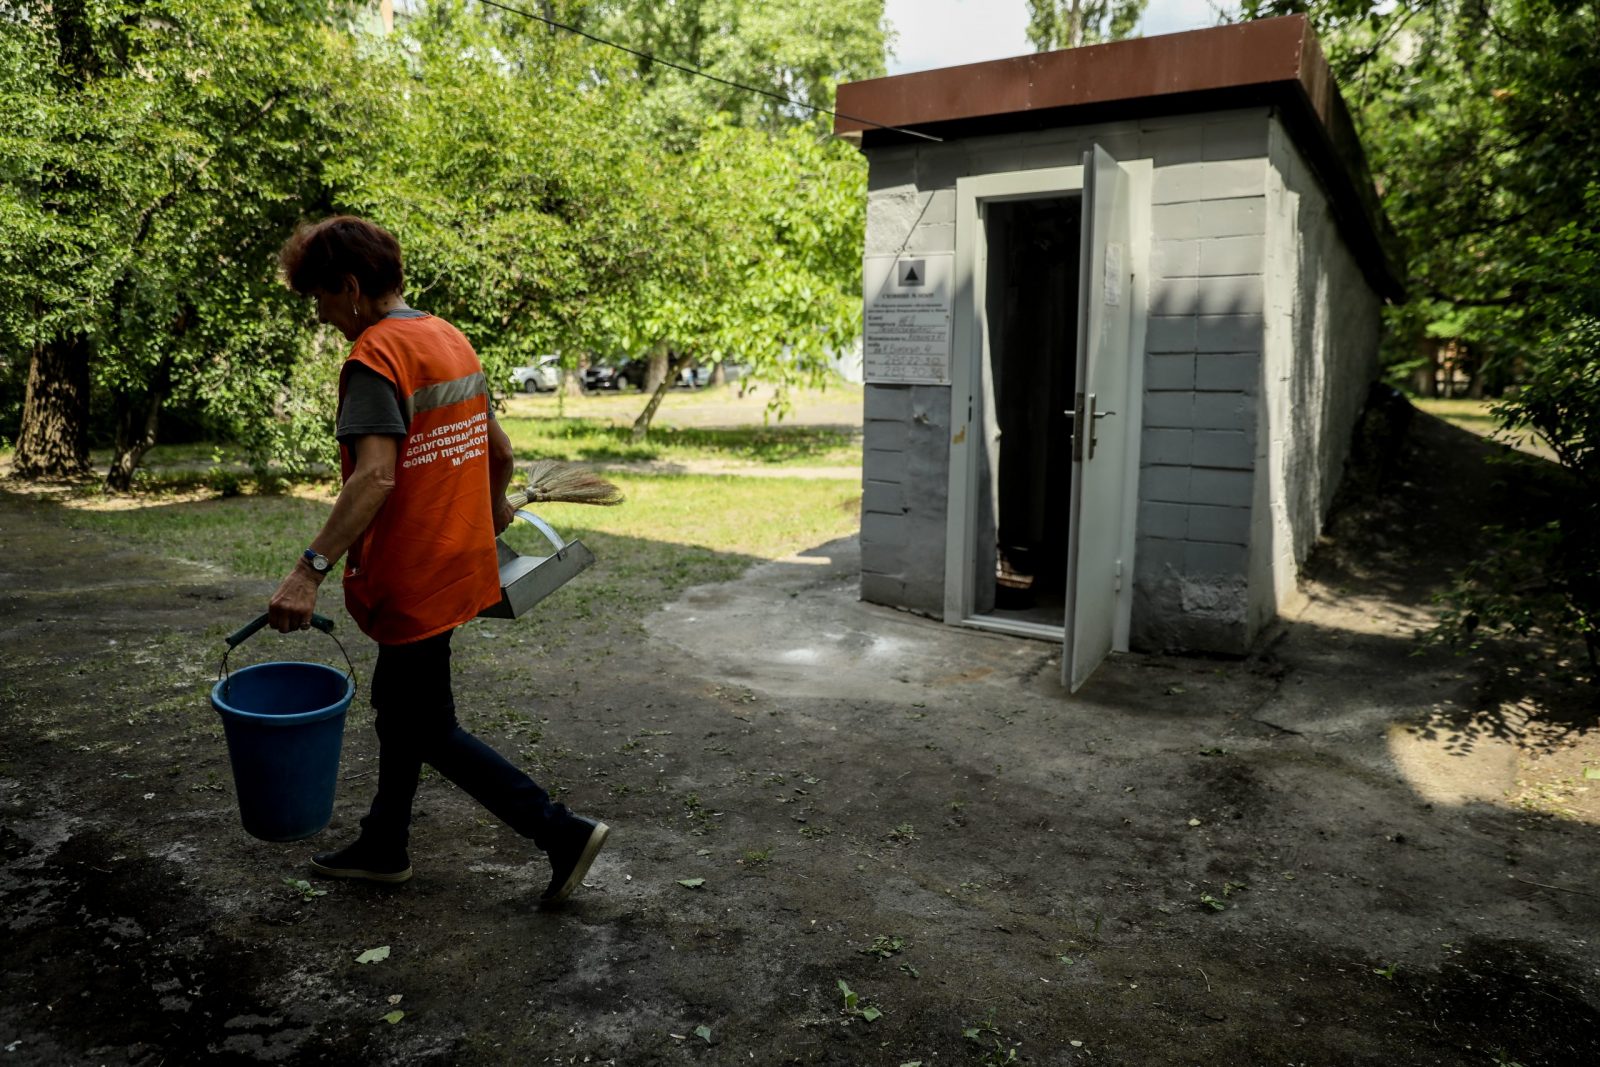 epa10674746 A communal worker walks past the entrance to a bomb shelter in Kyiv (Kiev), Ukraine, 05 June 2023. According to Ukraine's Minister of Strategic Industry Oleksandr Kamyshin, the bomb shelter in the capital is critical as half of the tested shelters were not ready to host any people. The minister released information regarding the inspection of over 1,800 bomb shelters, 32 percent of which were deemed unfit for use, while an additional 13 percent were closed. Russian troops entered Ukraine in February 2022 starting a conflict that has provoked destruction and a humanitarian crisis.  EPA/OLEG PETRASYUK